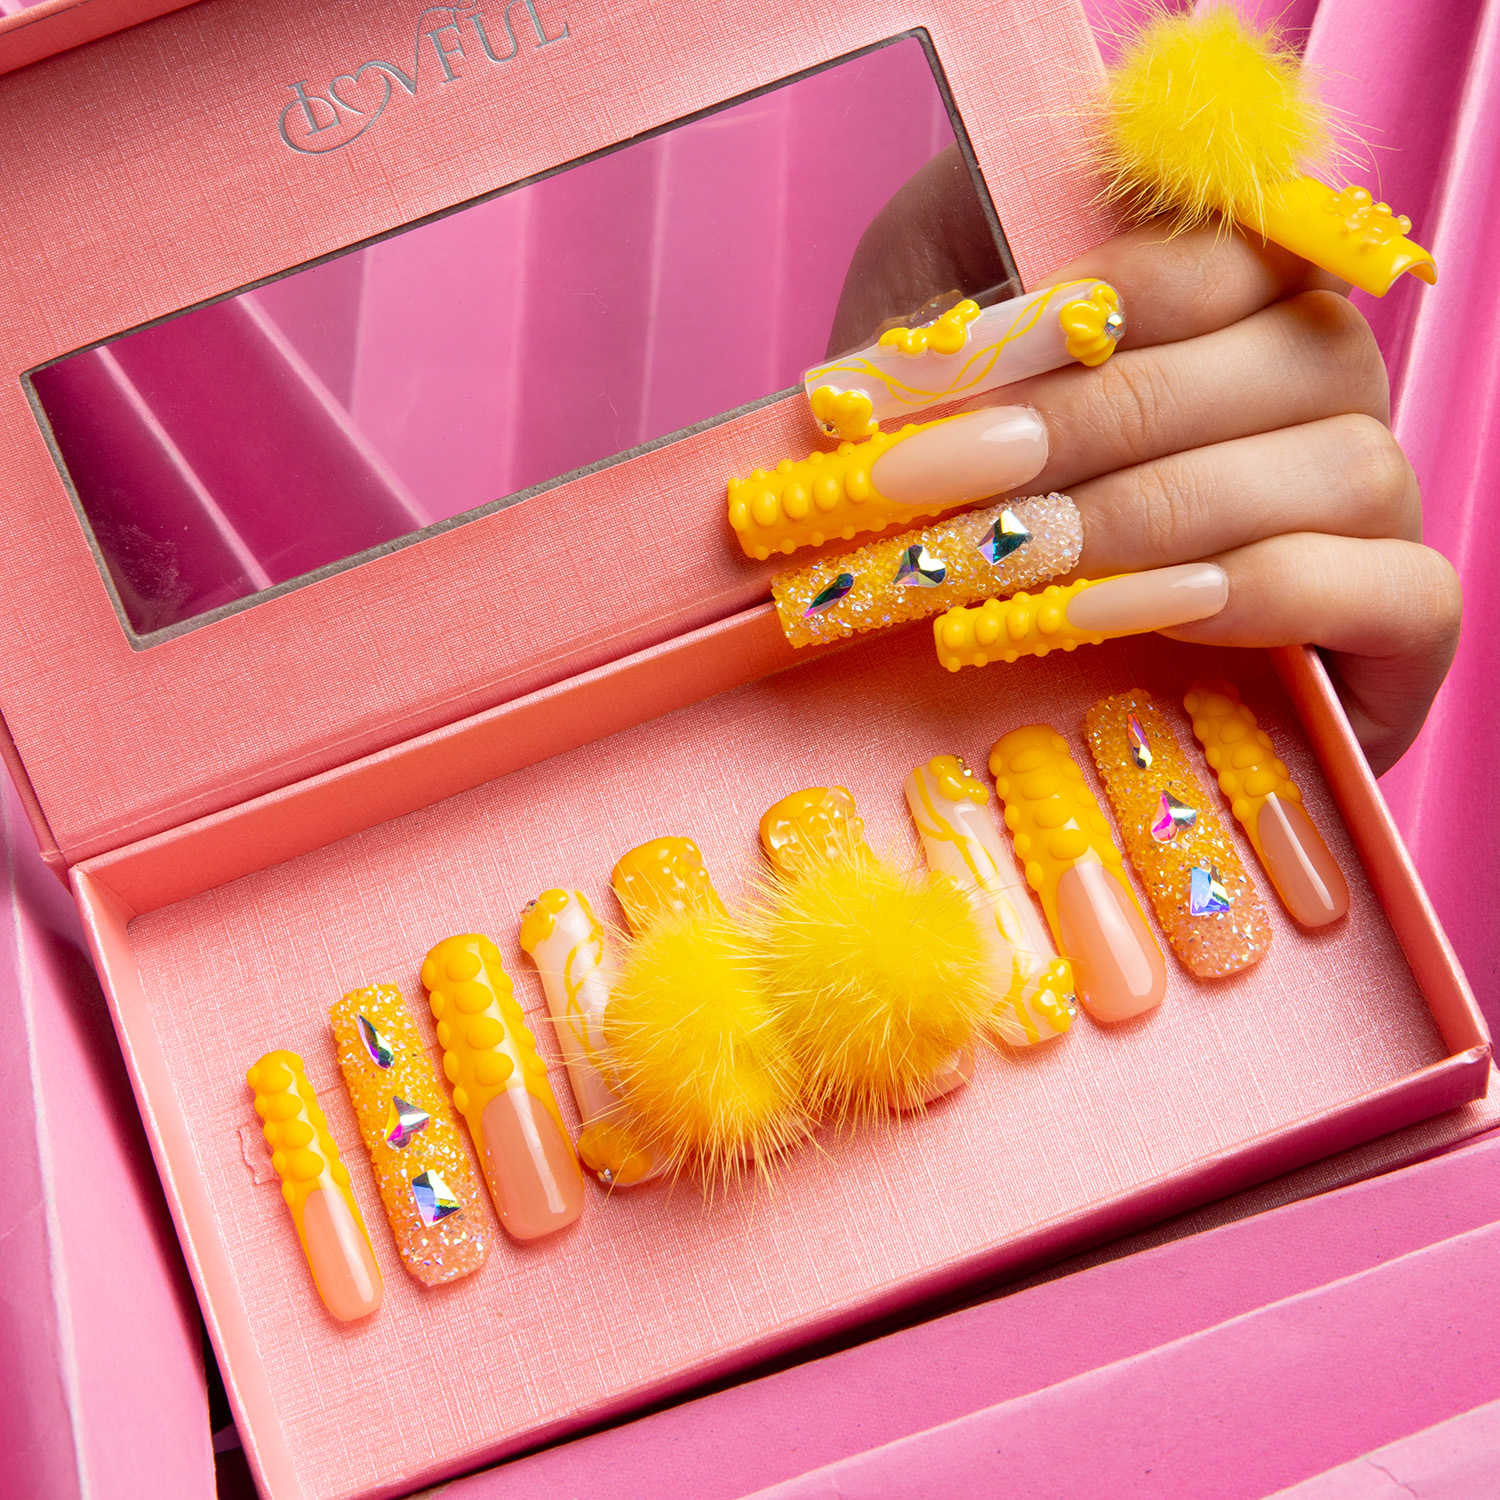 Hand with yellow-themed press-on acrylic nails adorned with glitter and gems, and fluffy ball decorations, placed in a pink Lovful box